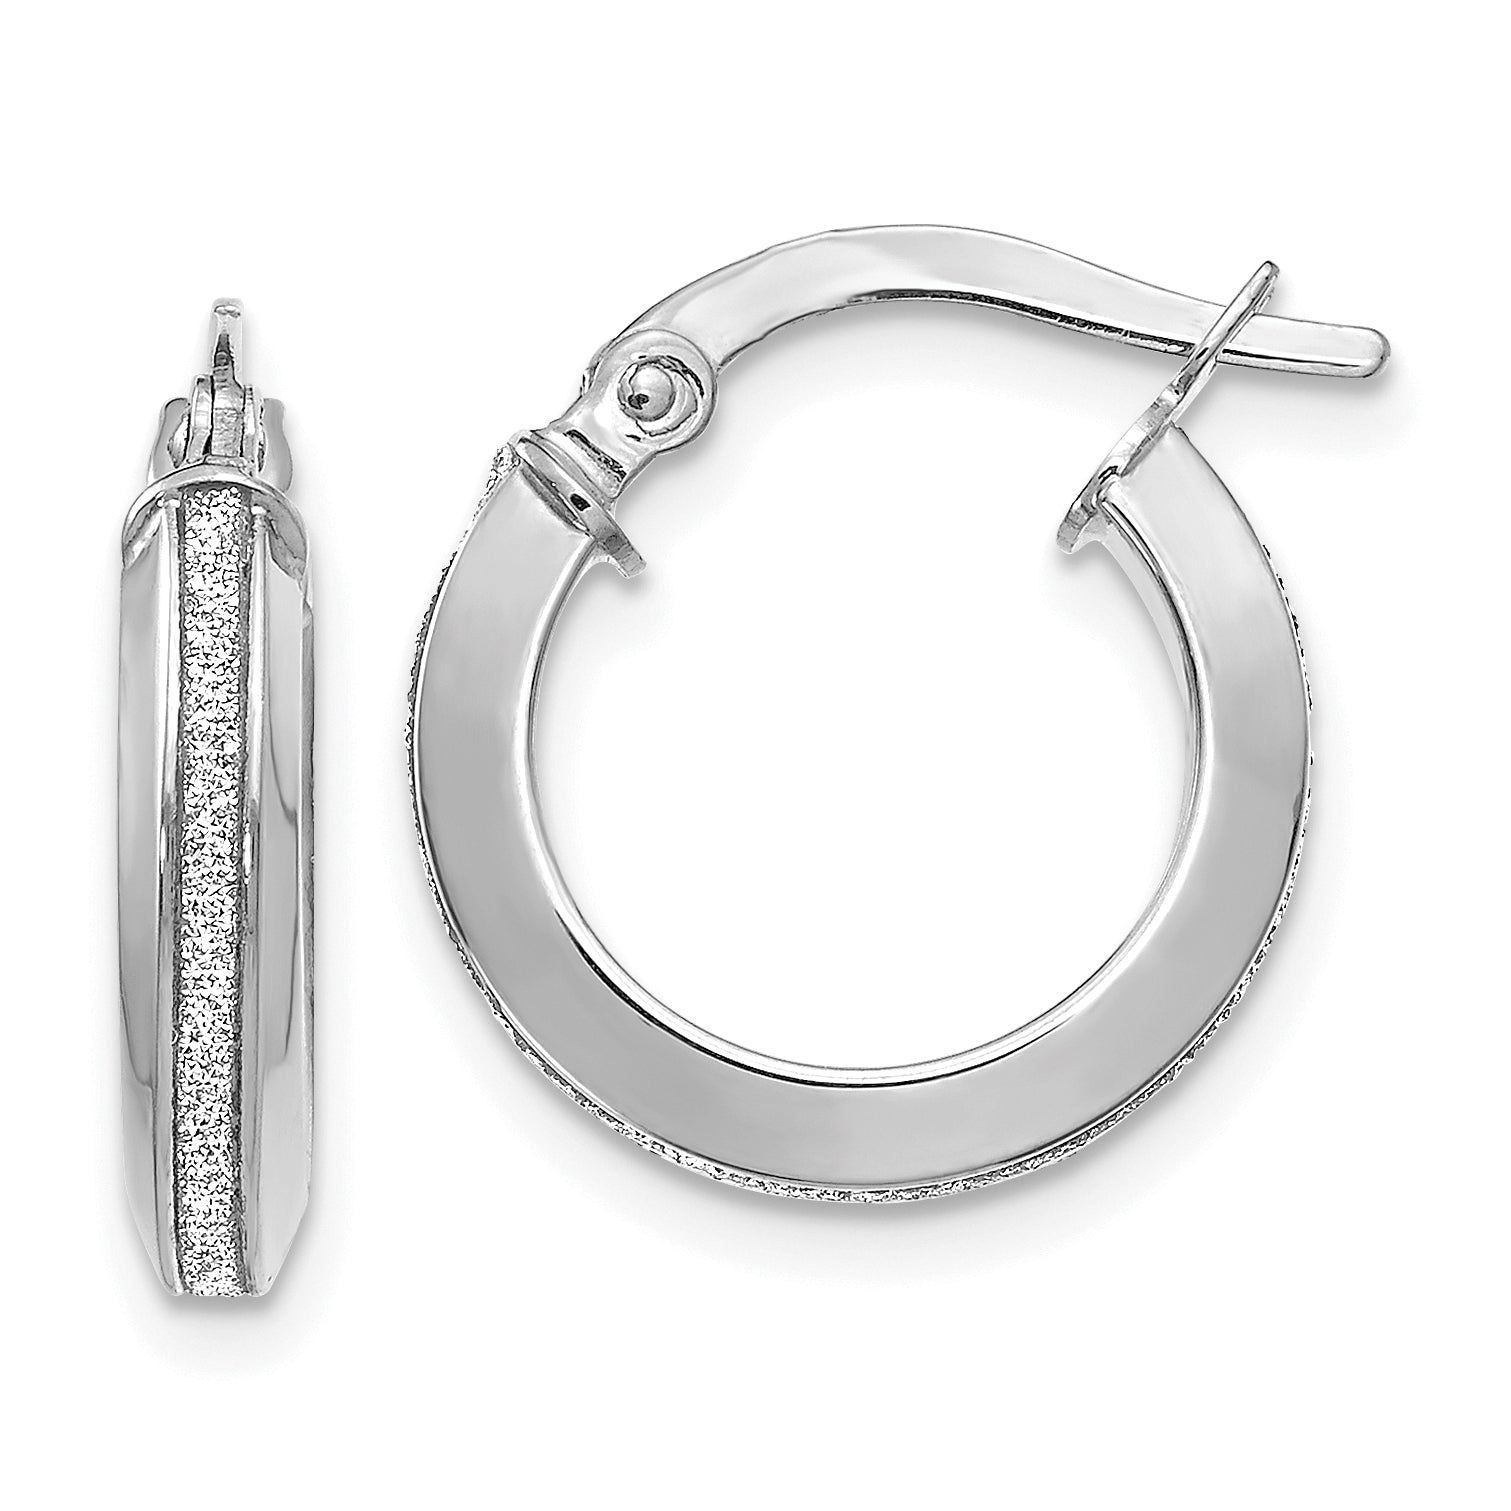 14K White Gold Polished Glimmer Infused Hoop Earrings